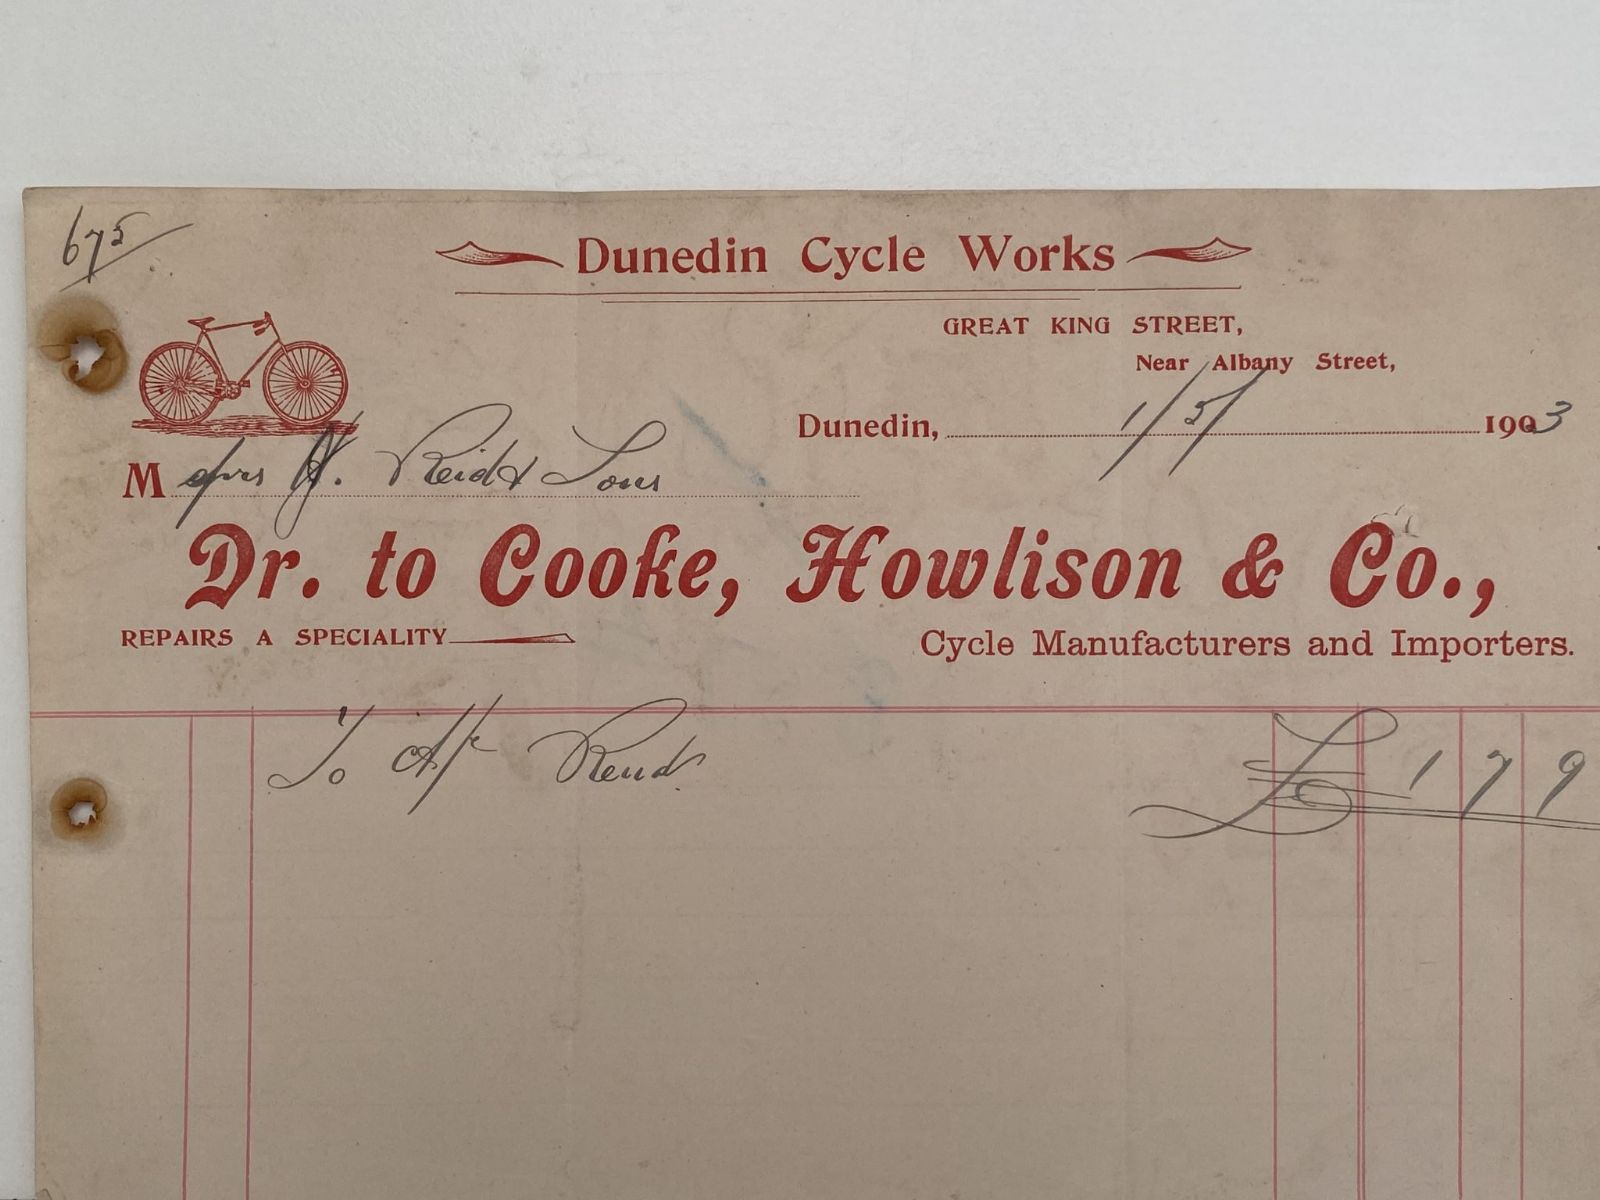 OLD INVOICE: Cooke, Howlinson & Co - Cycle Manufacturers, Dunedin 1903 (119 yo)